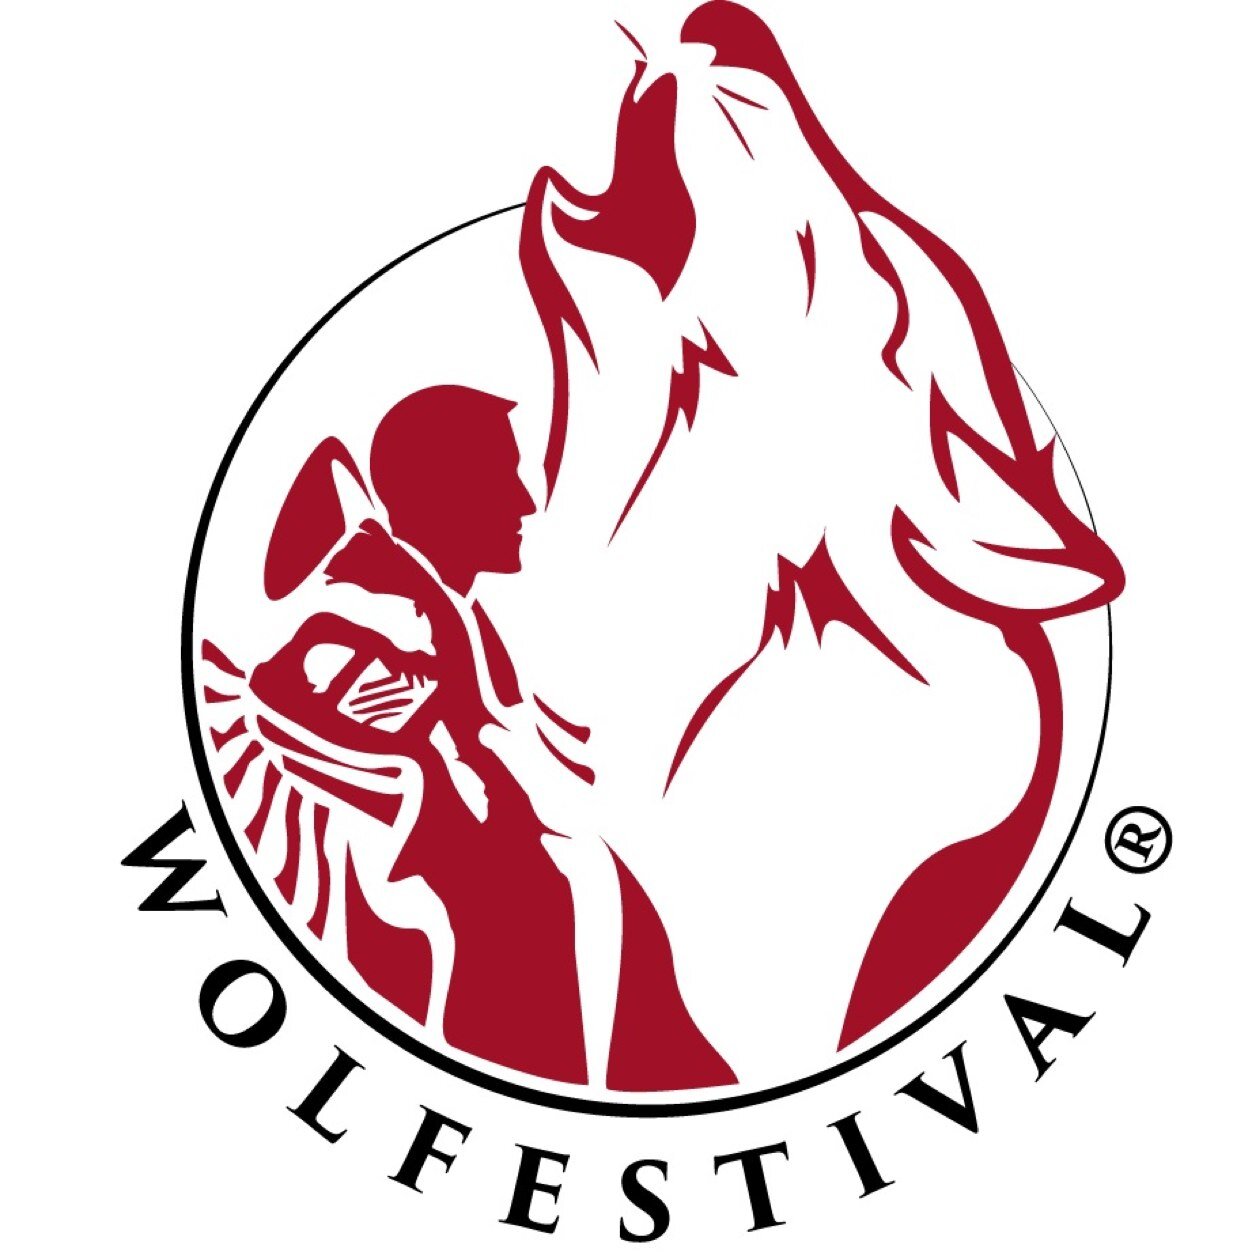 Official twitter of International Wolf Festival. The festival has been cancelled at Zamora, Spain.